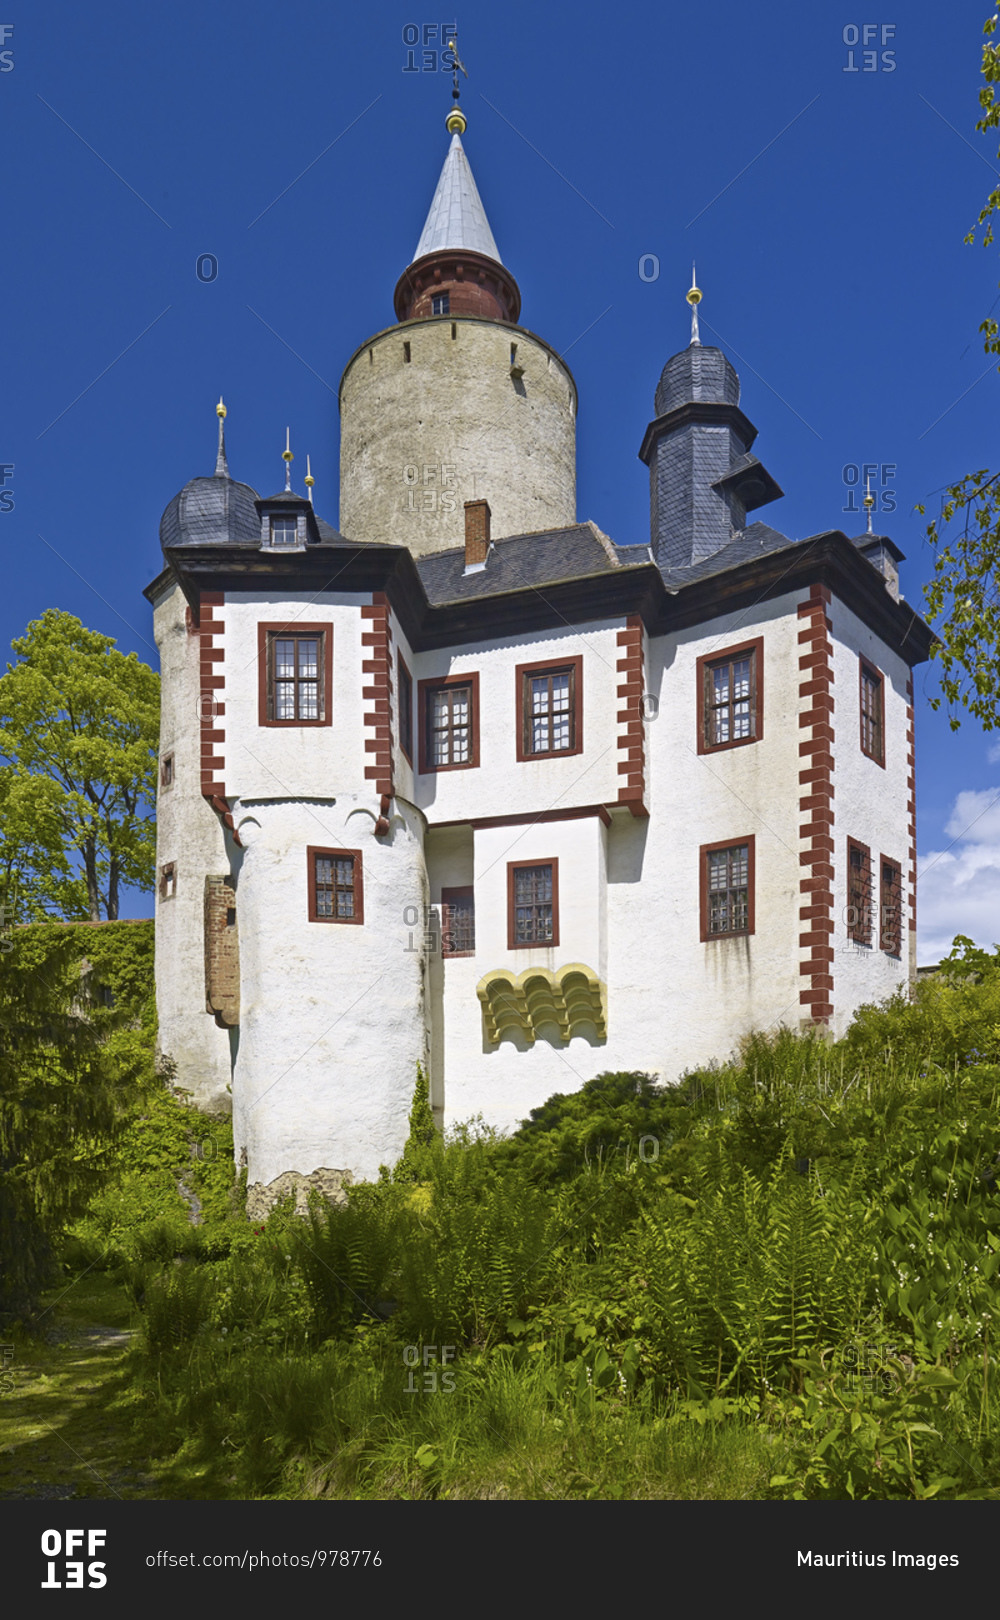 Posterstein Castle in the Upper Sprottental, Altenburger Land District, Thuringia, Germany, Europe